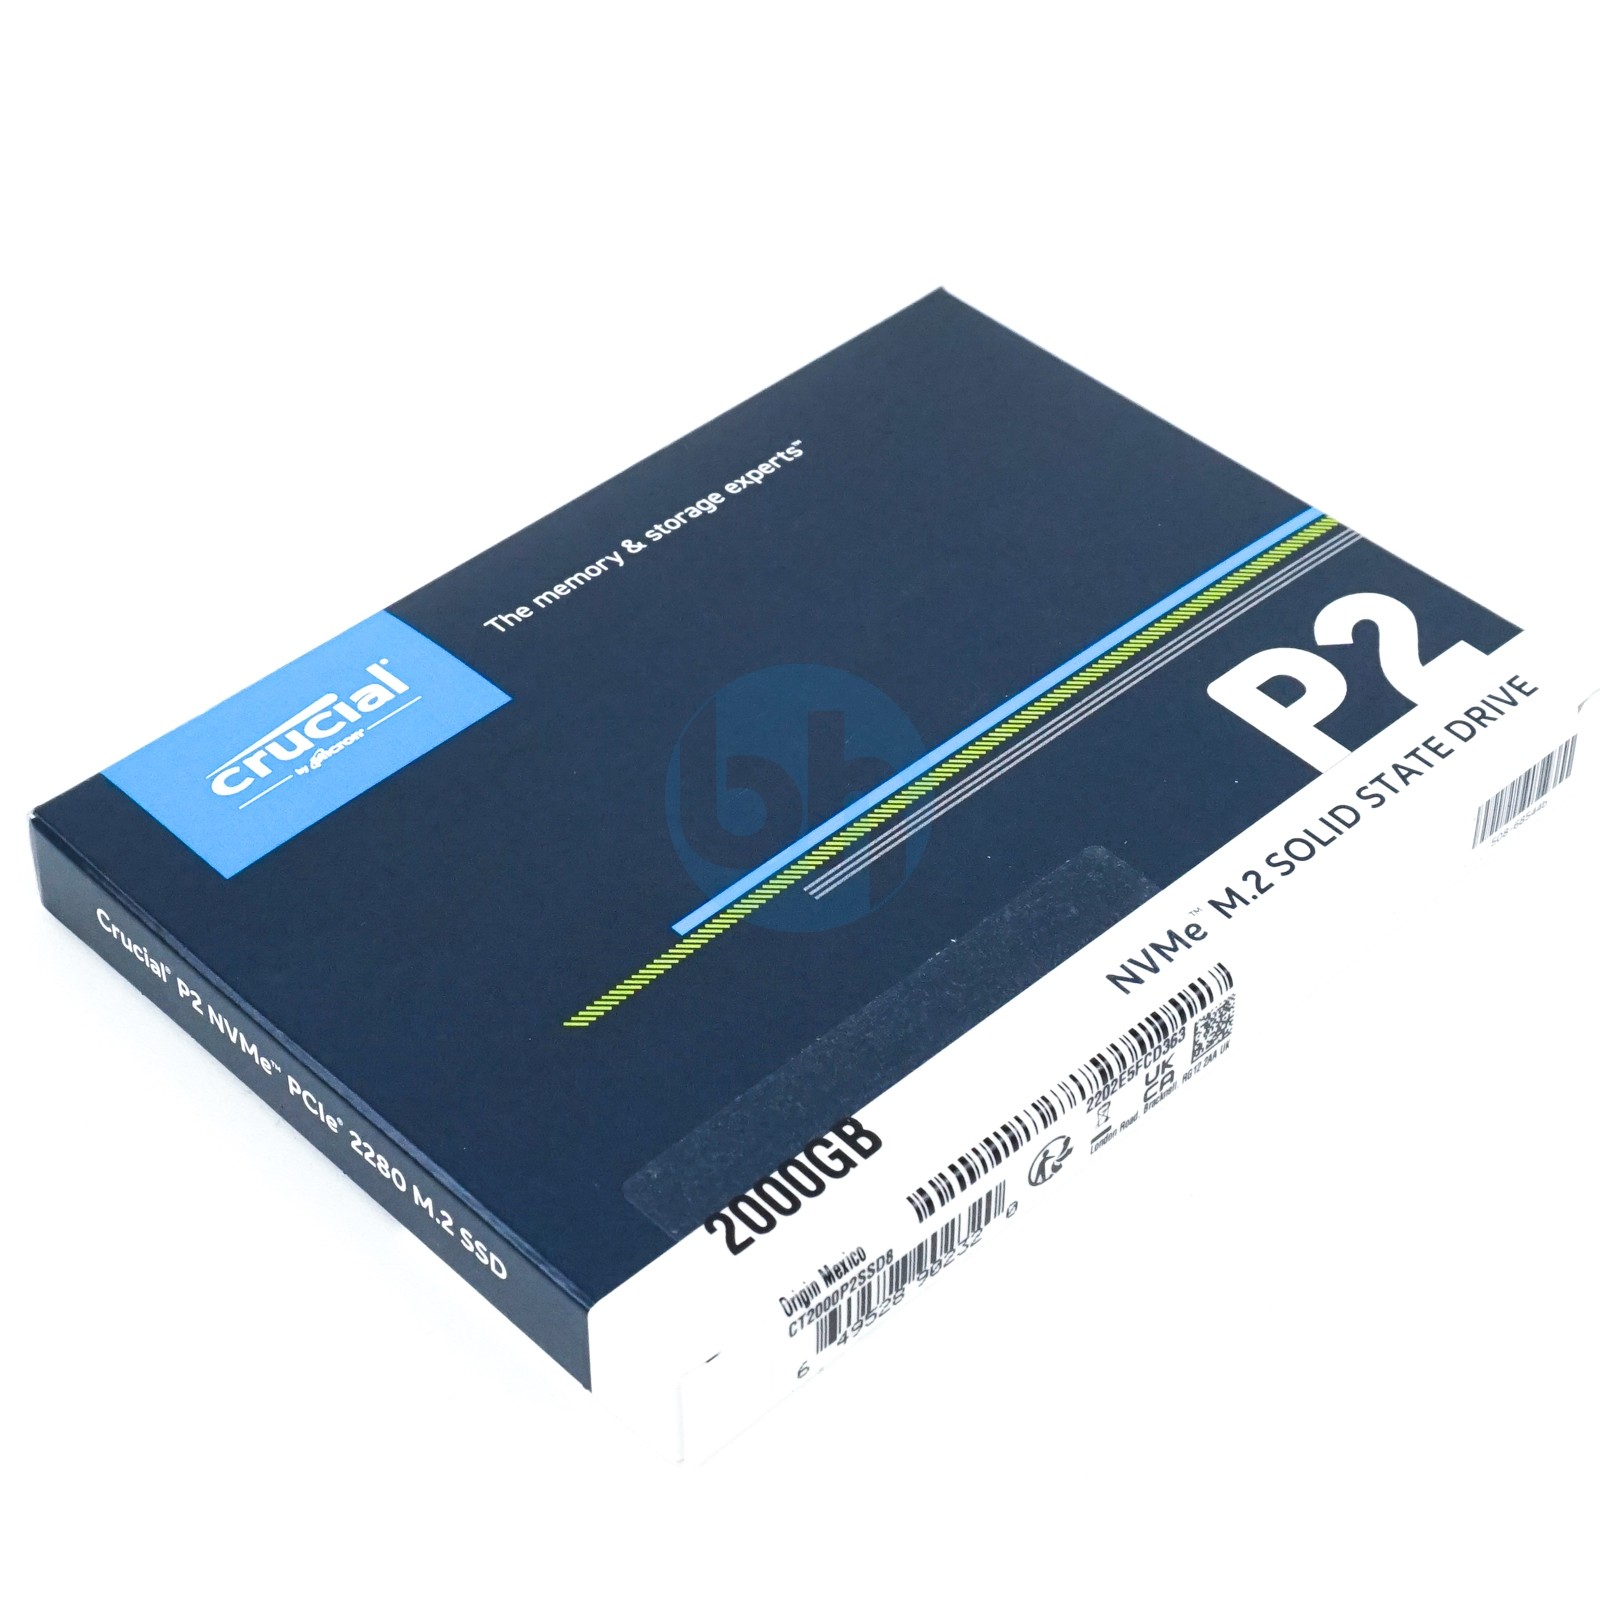 Crucial (CT2000P2SSD8) - 2TB P2 Series M.2 2280 NVMe SSD New